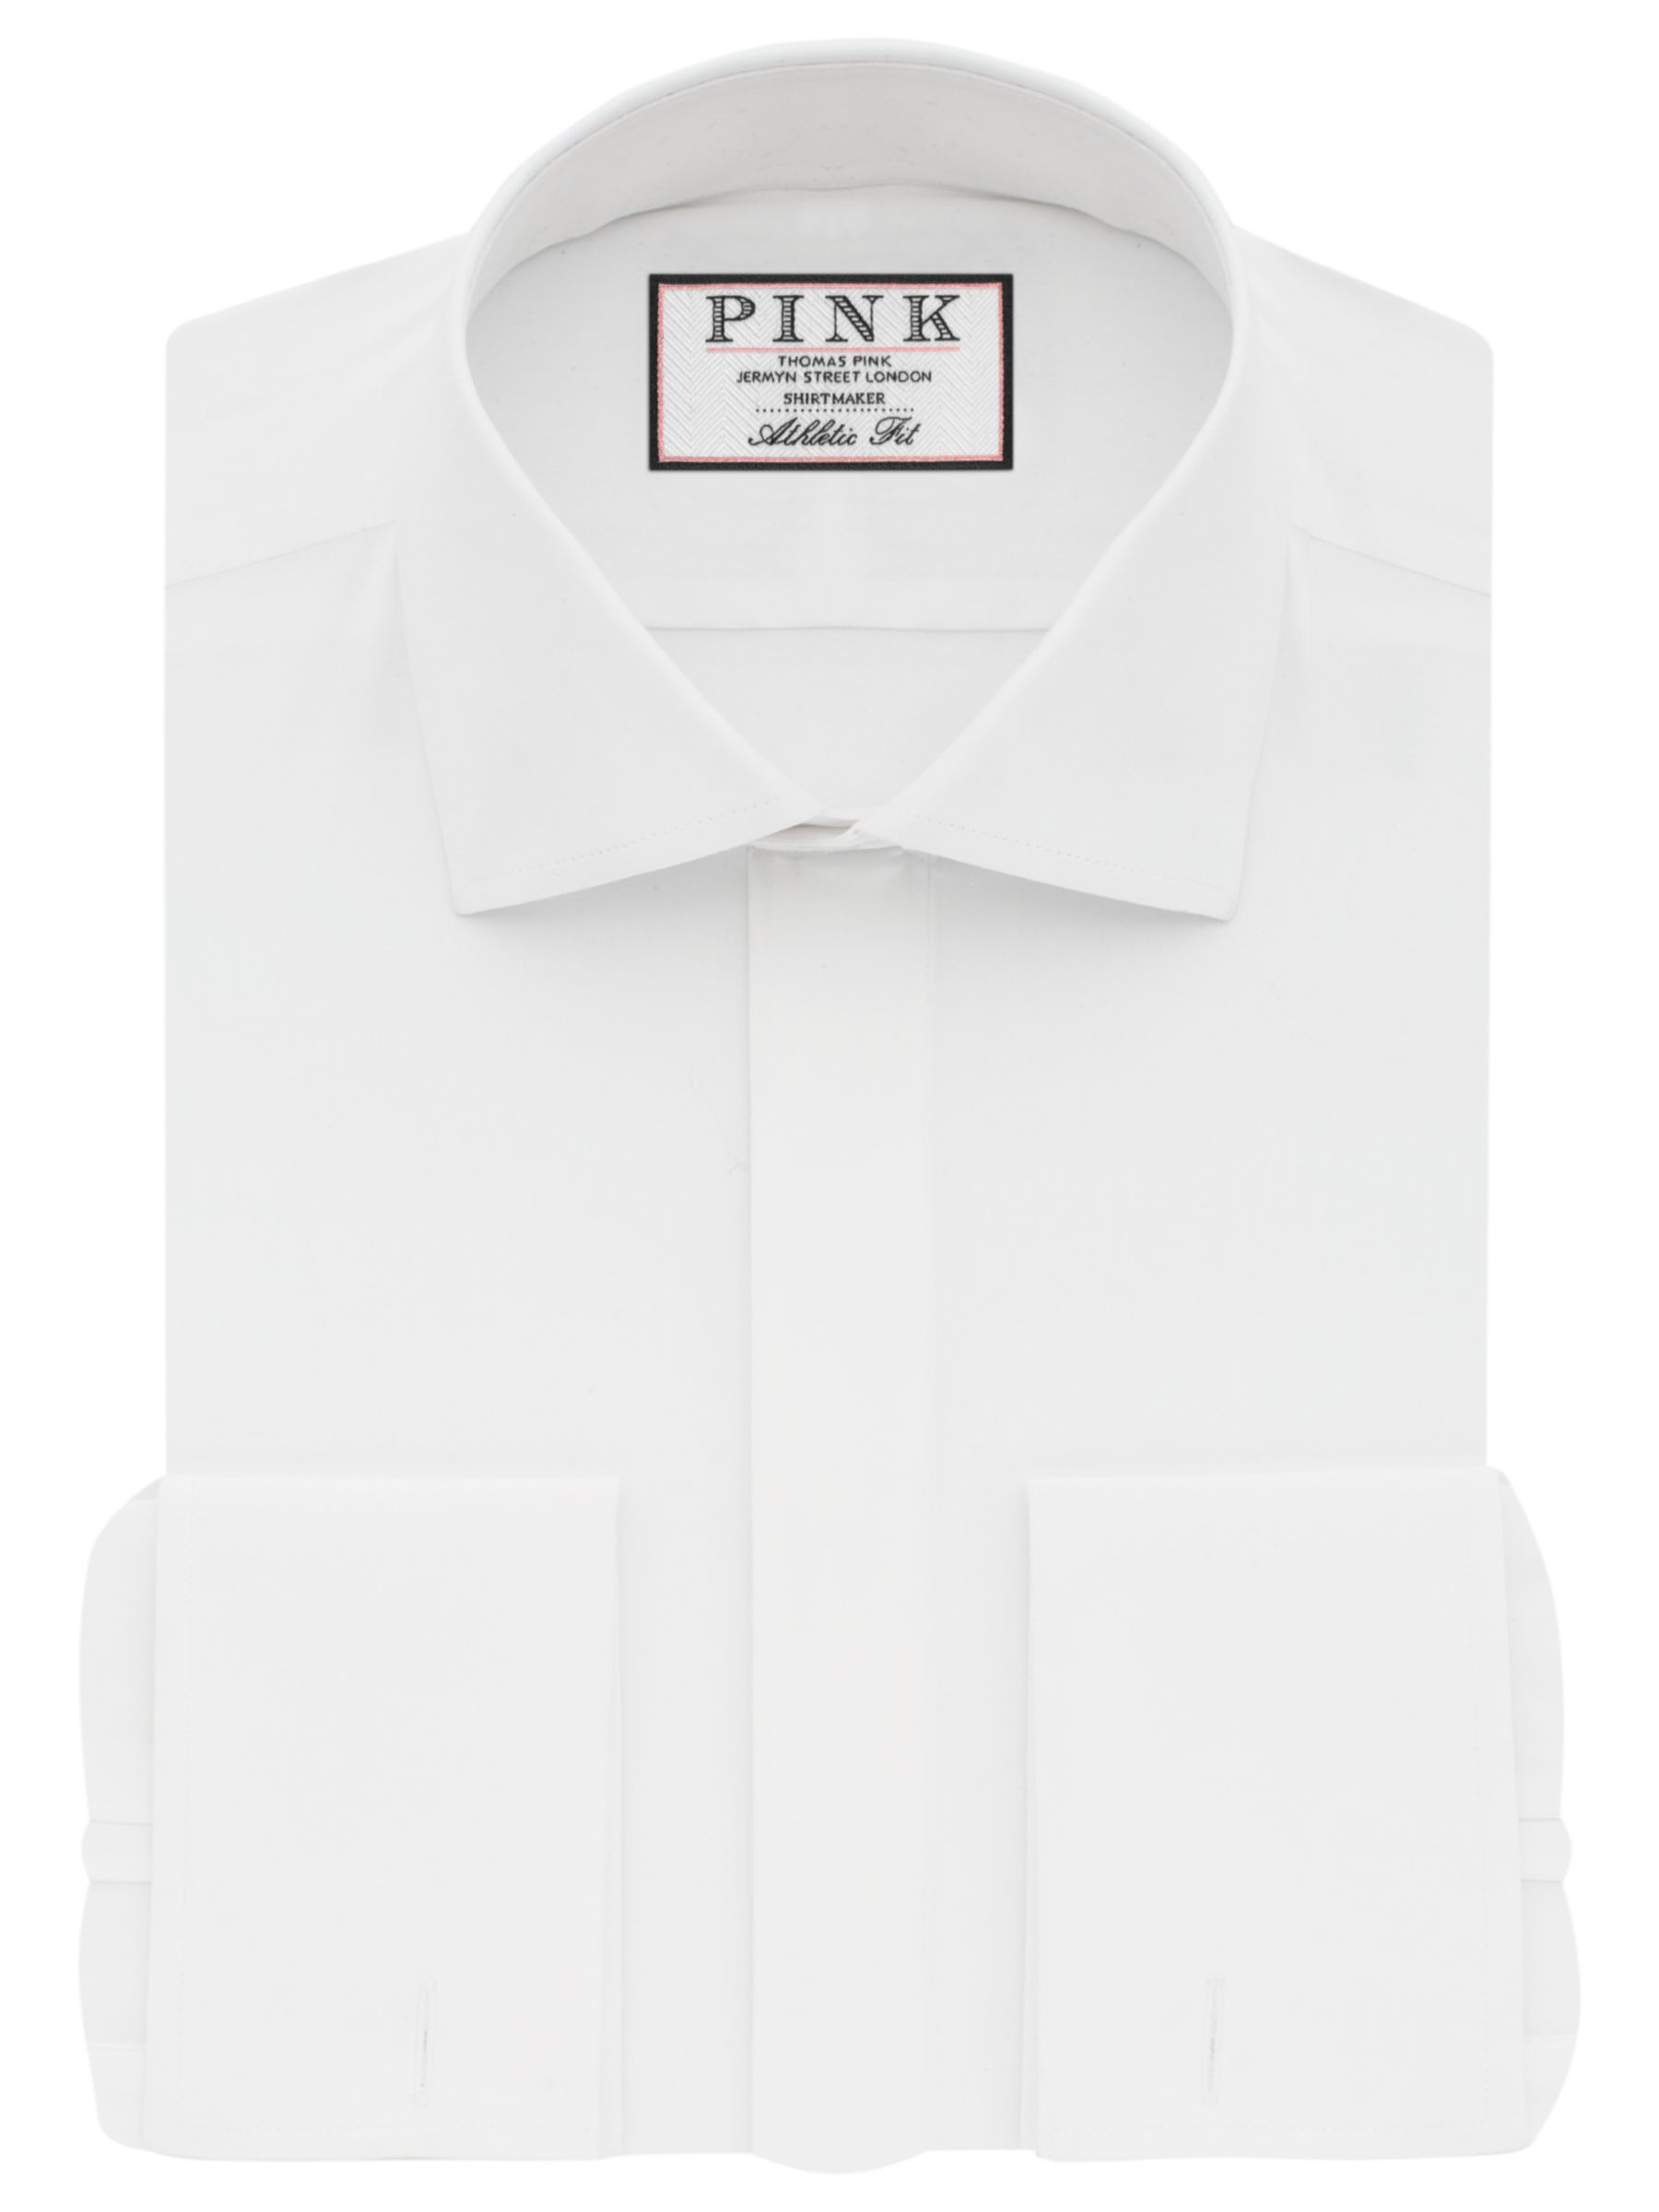 Thomas Pink Placket Athletic Fit Double Cuff Dress Shirt, White